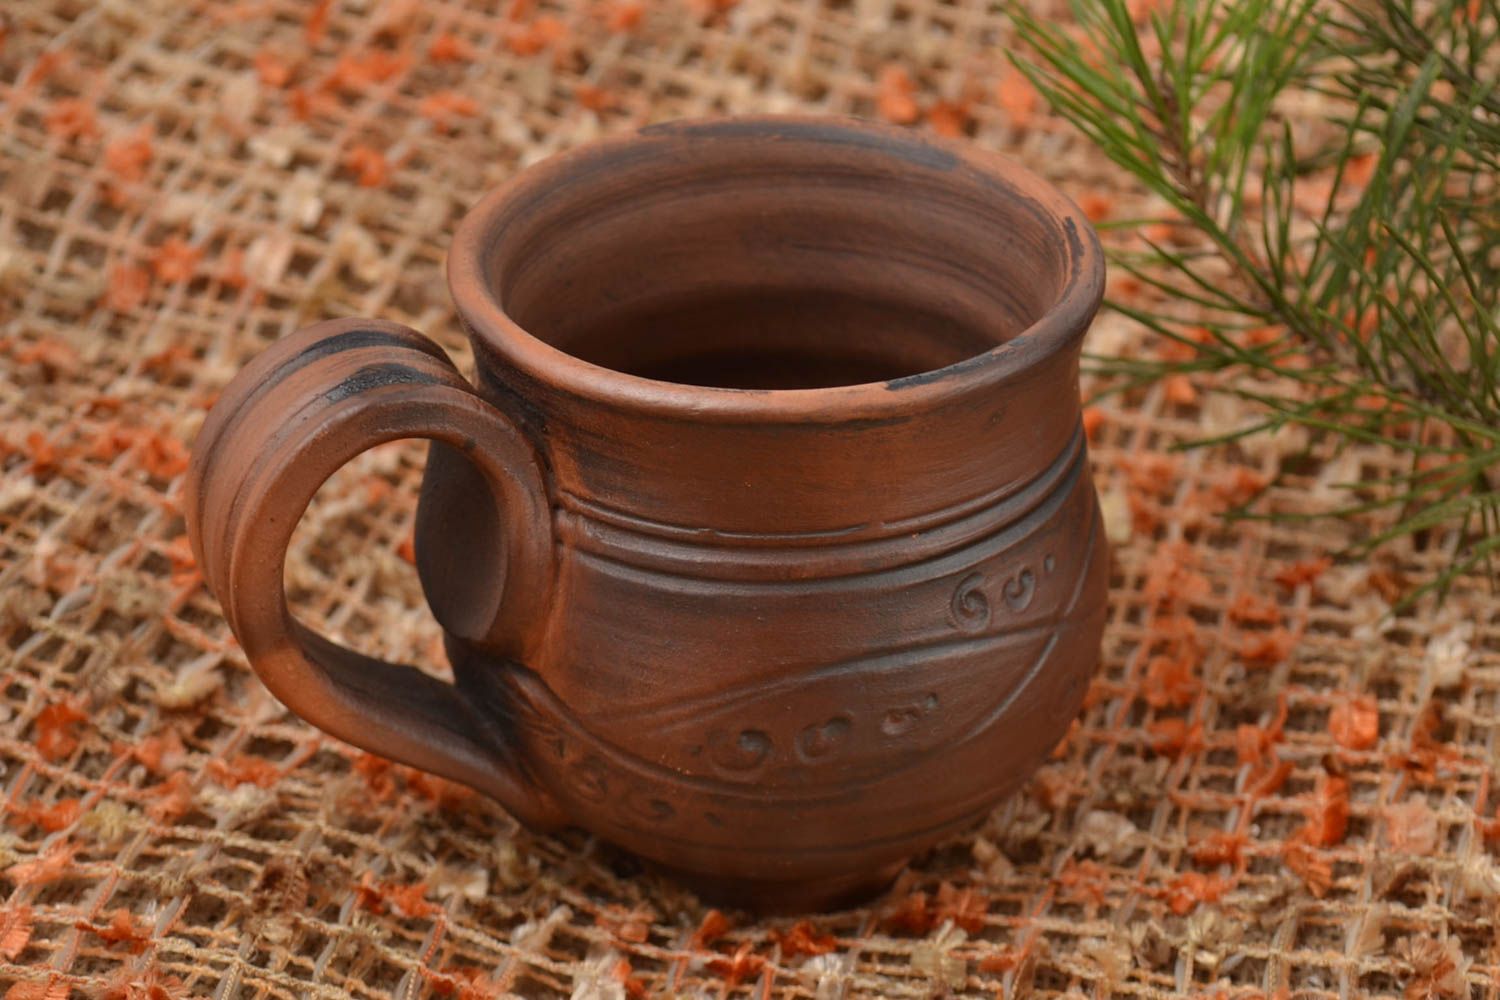 Large clay classic teacup with handle and simple village pattern 0,49 lb photo 1